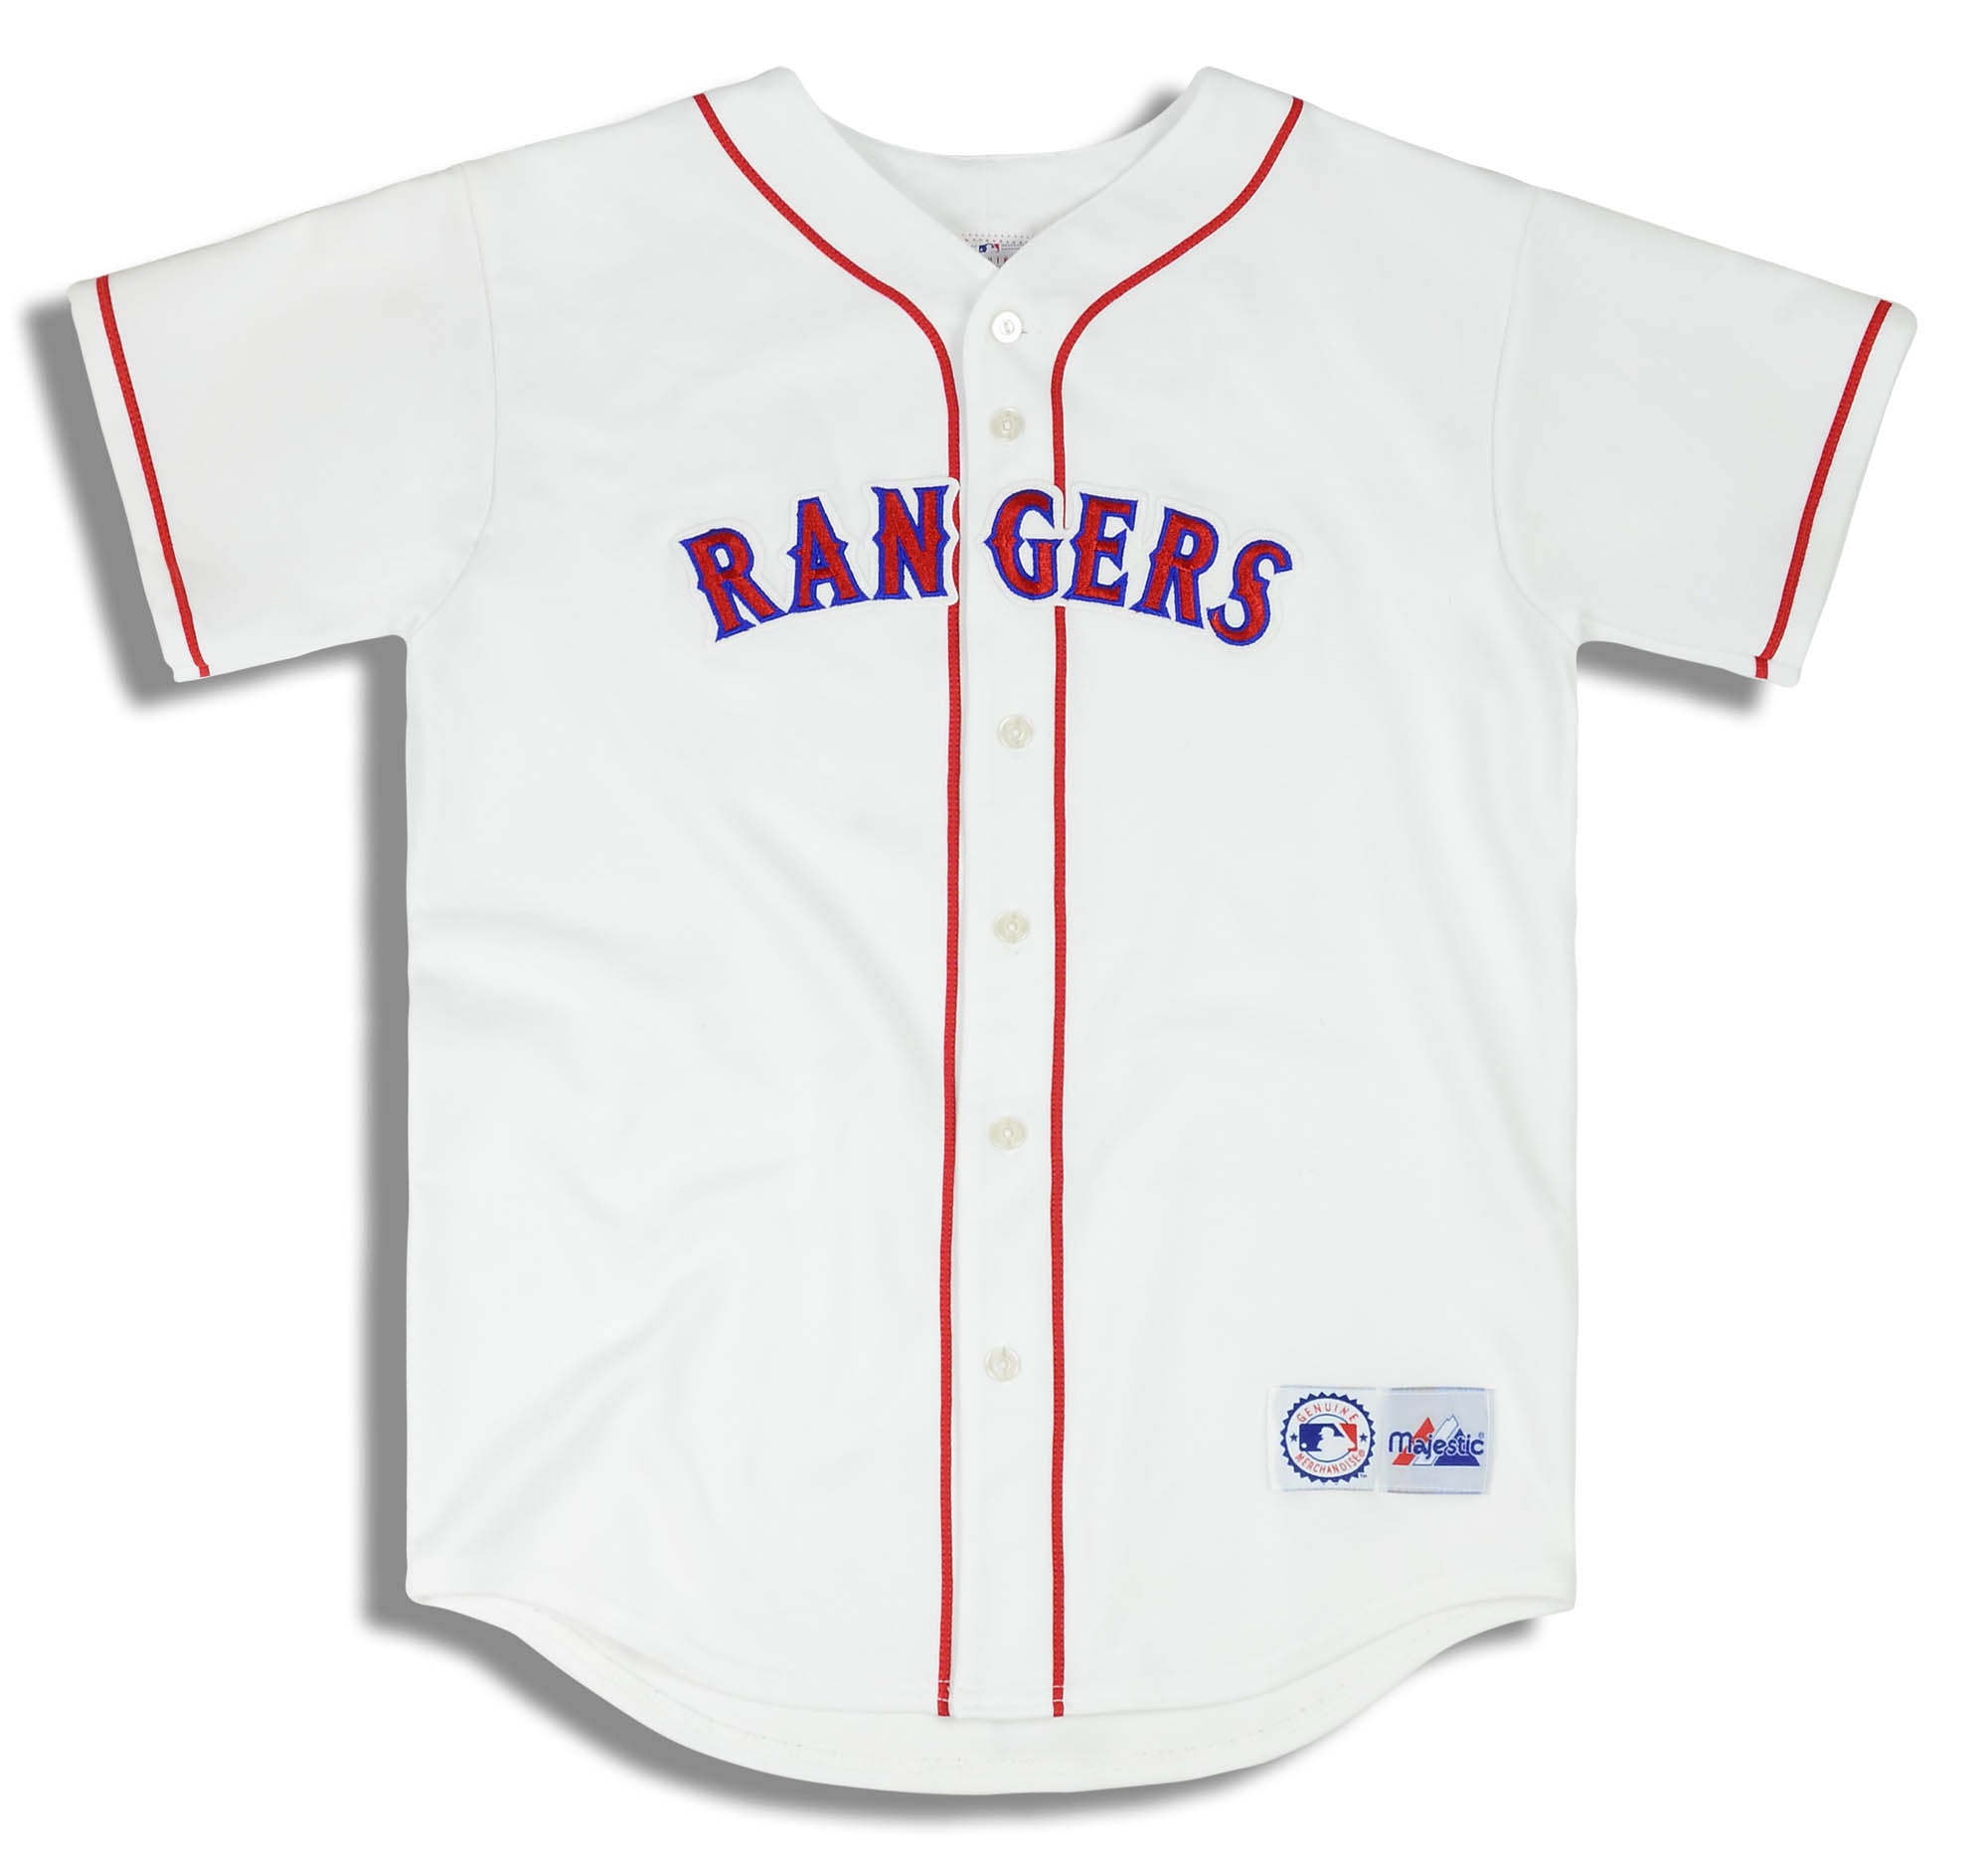 2000 TEXAS RANGERS MAJESTIC JERSEY (HOME) S - Classic American Sports